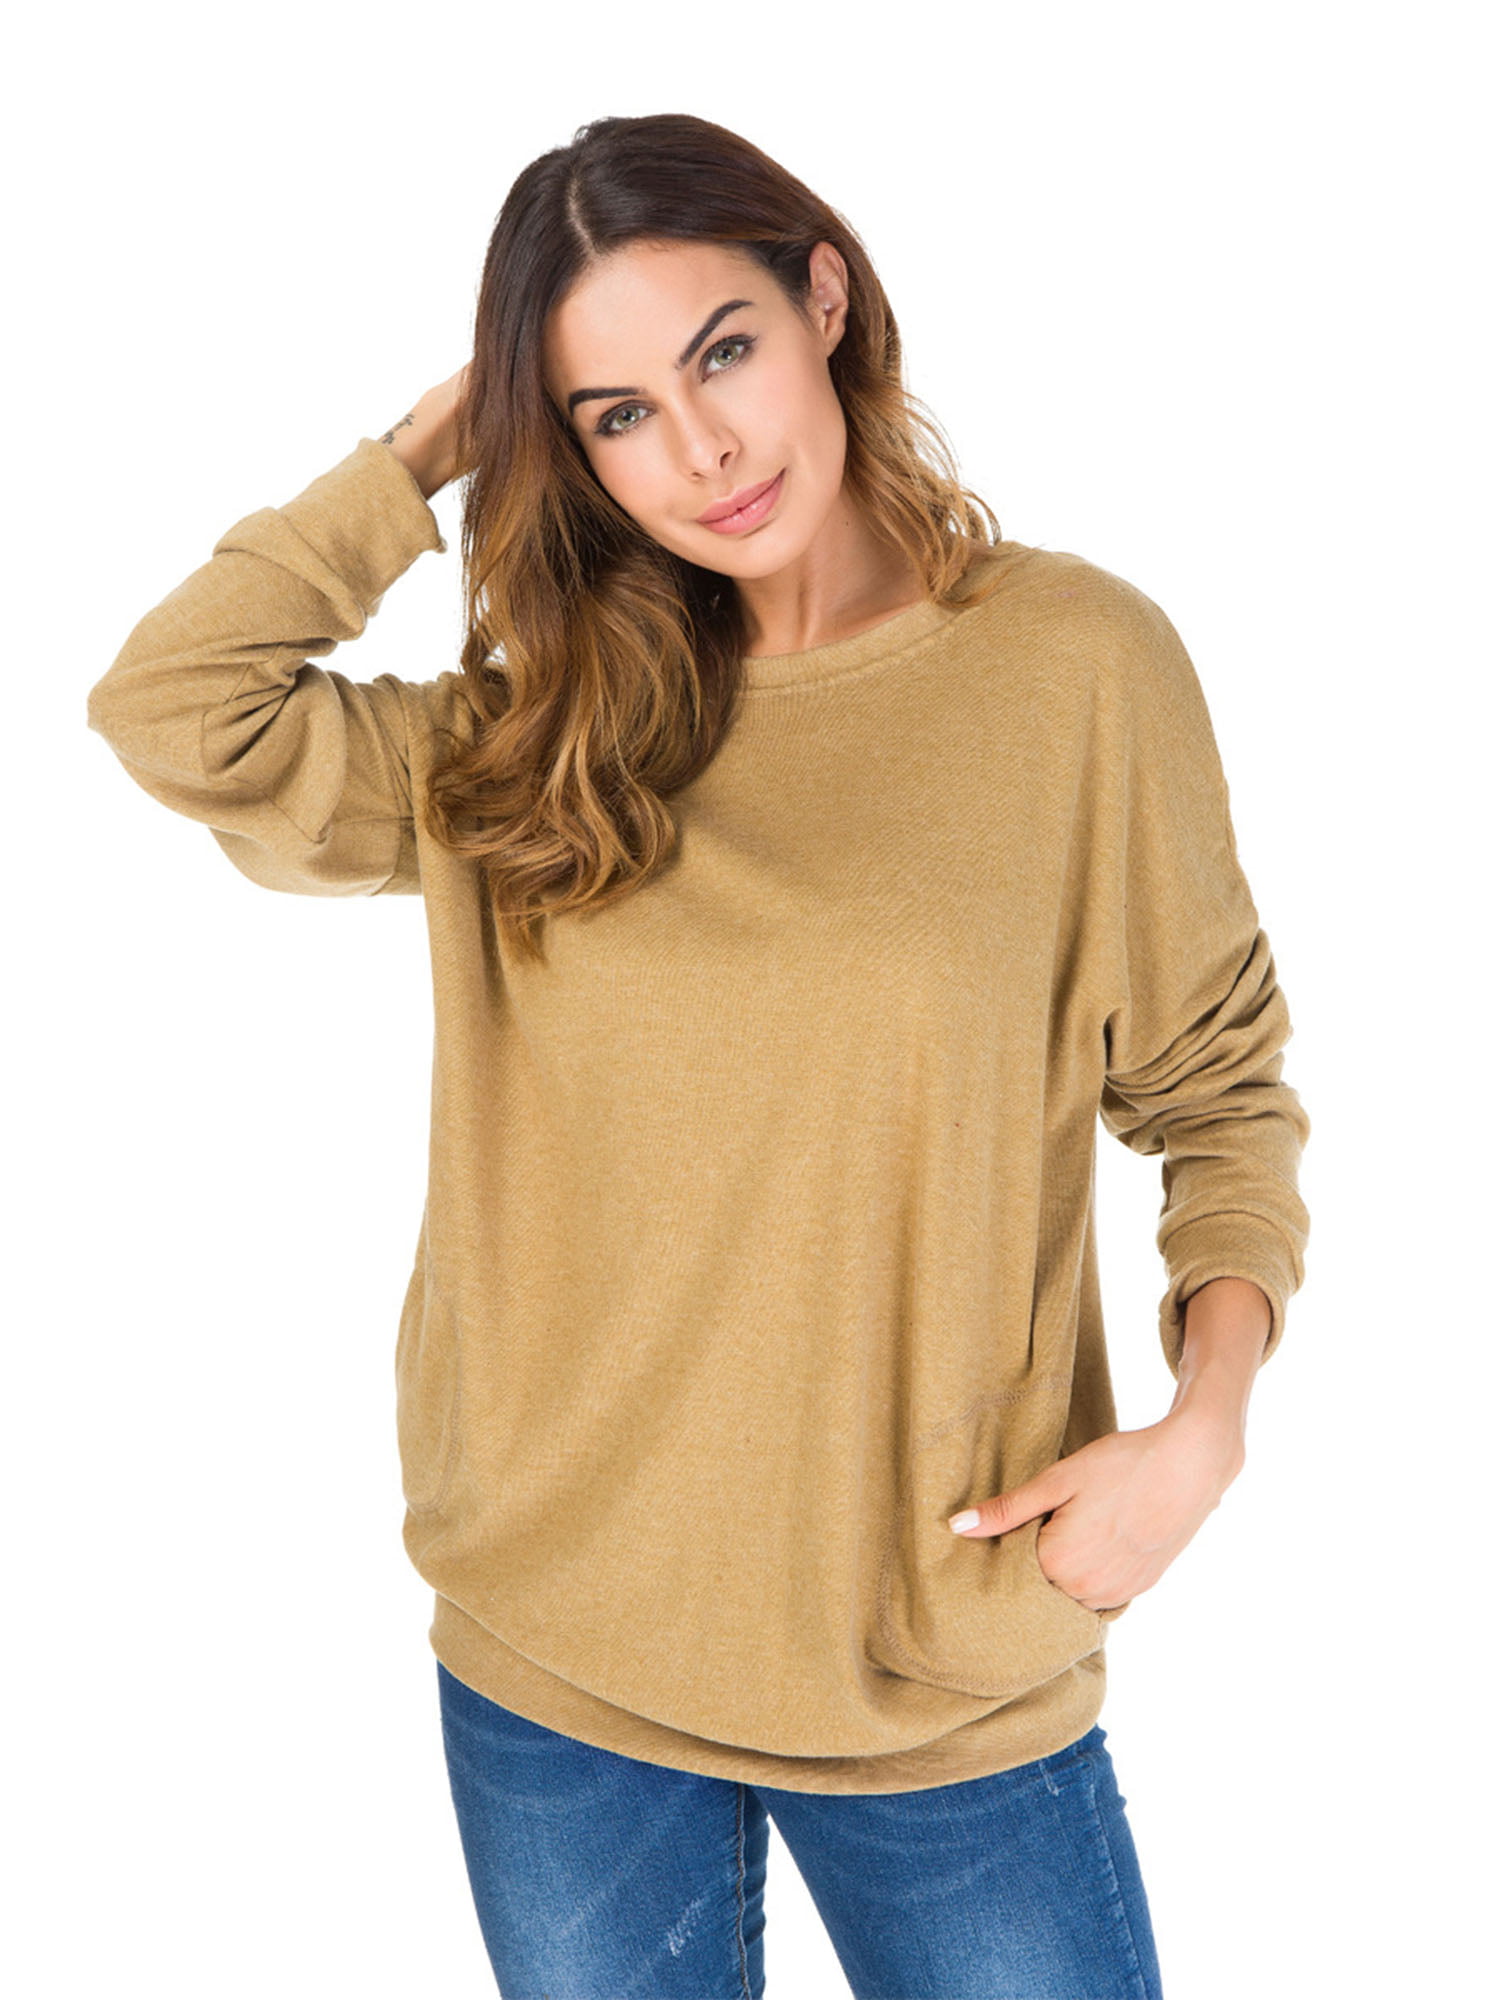 Tomteamell Womens Round Neck Side Split Pocket Long Sleeve Shirt Loose Casual Blouse Tops